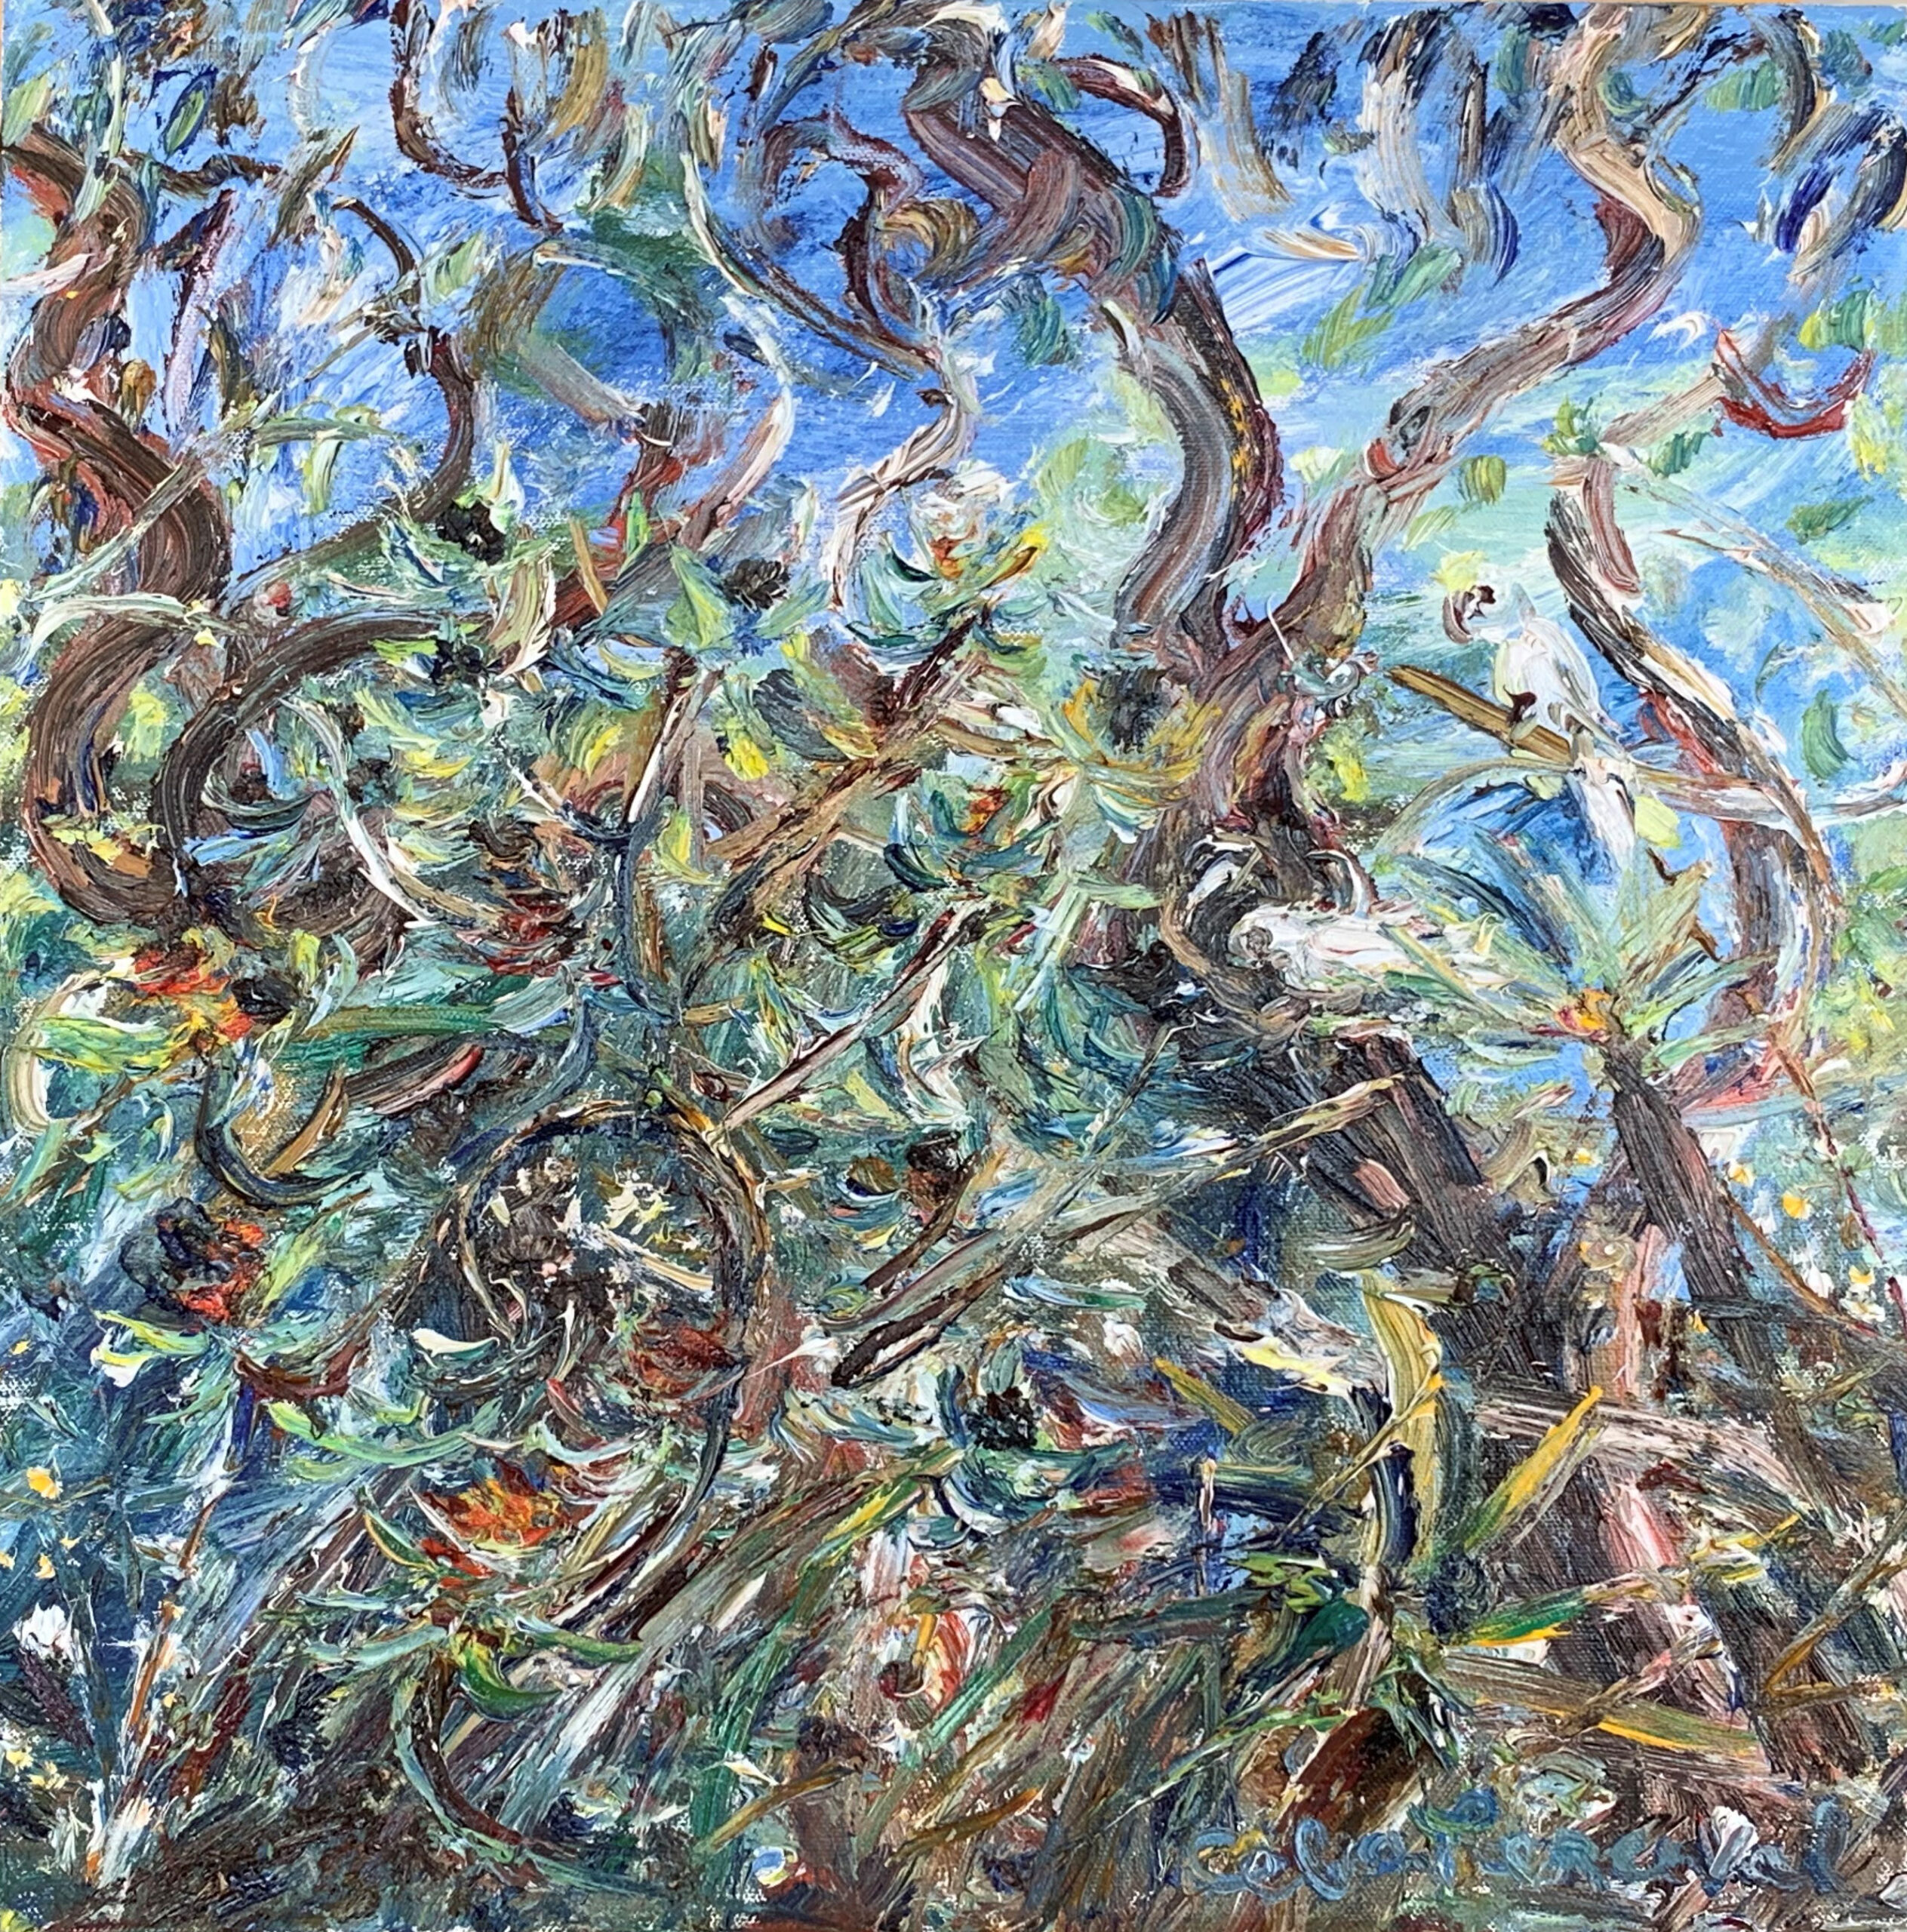 Perceval_Cockatoss Nesting in the Applegums with Banksias in Bundeena Bush NSW_oil on canvas_40x40_master